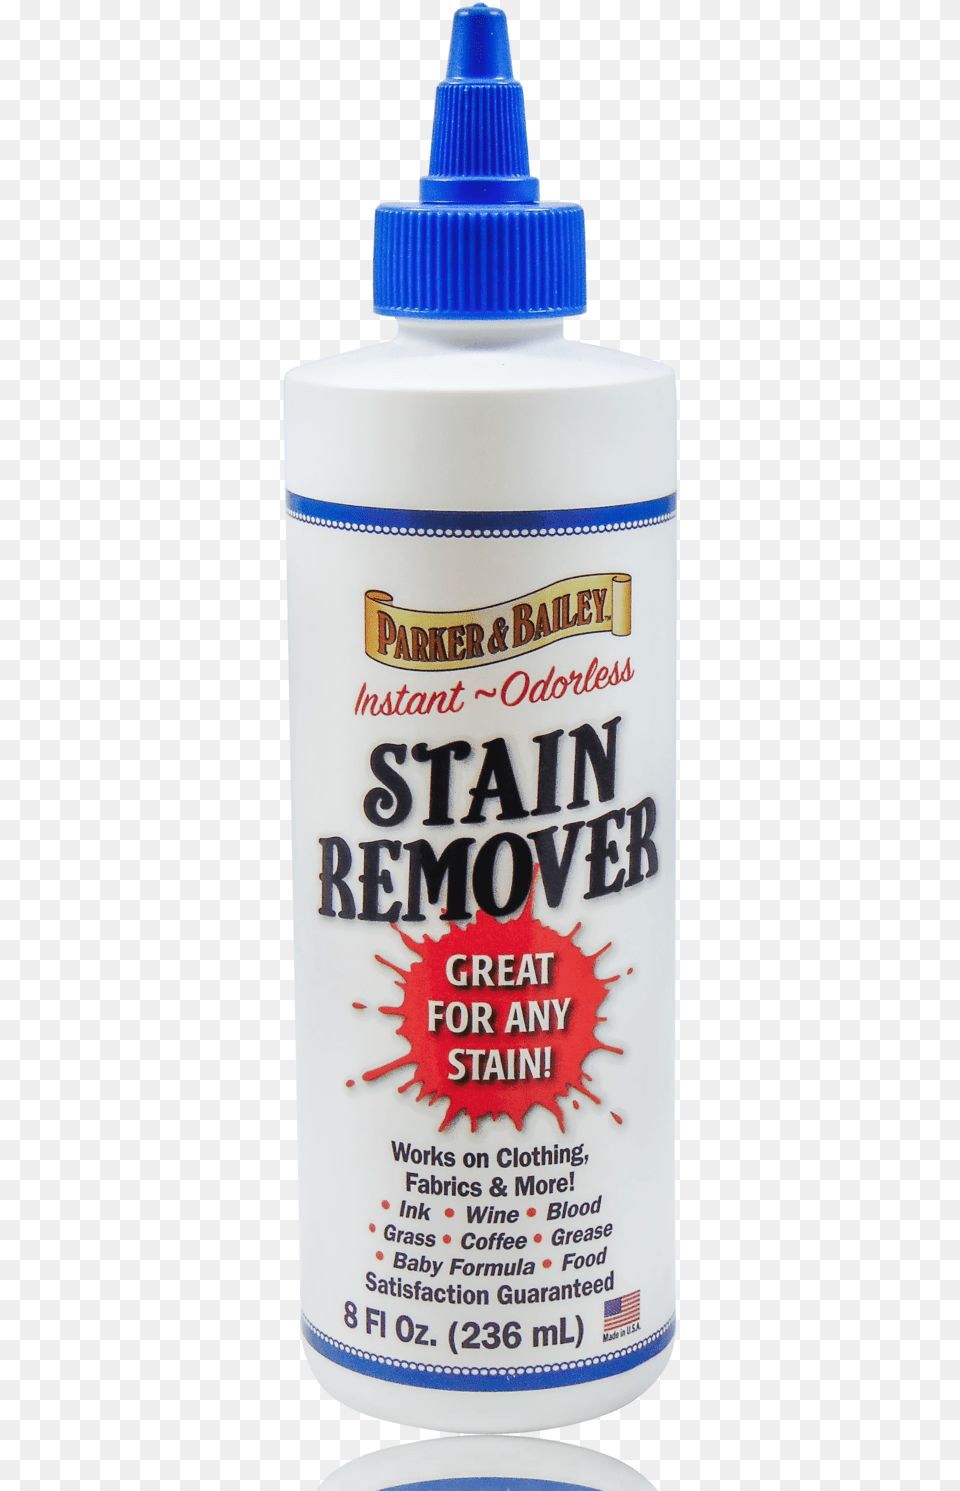 Parker And Bailey Stain Remover Bottle, Alcohol, Beer, Beverage Png